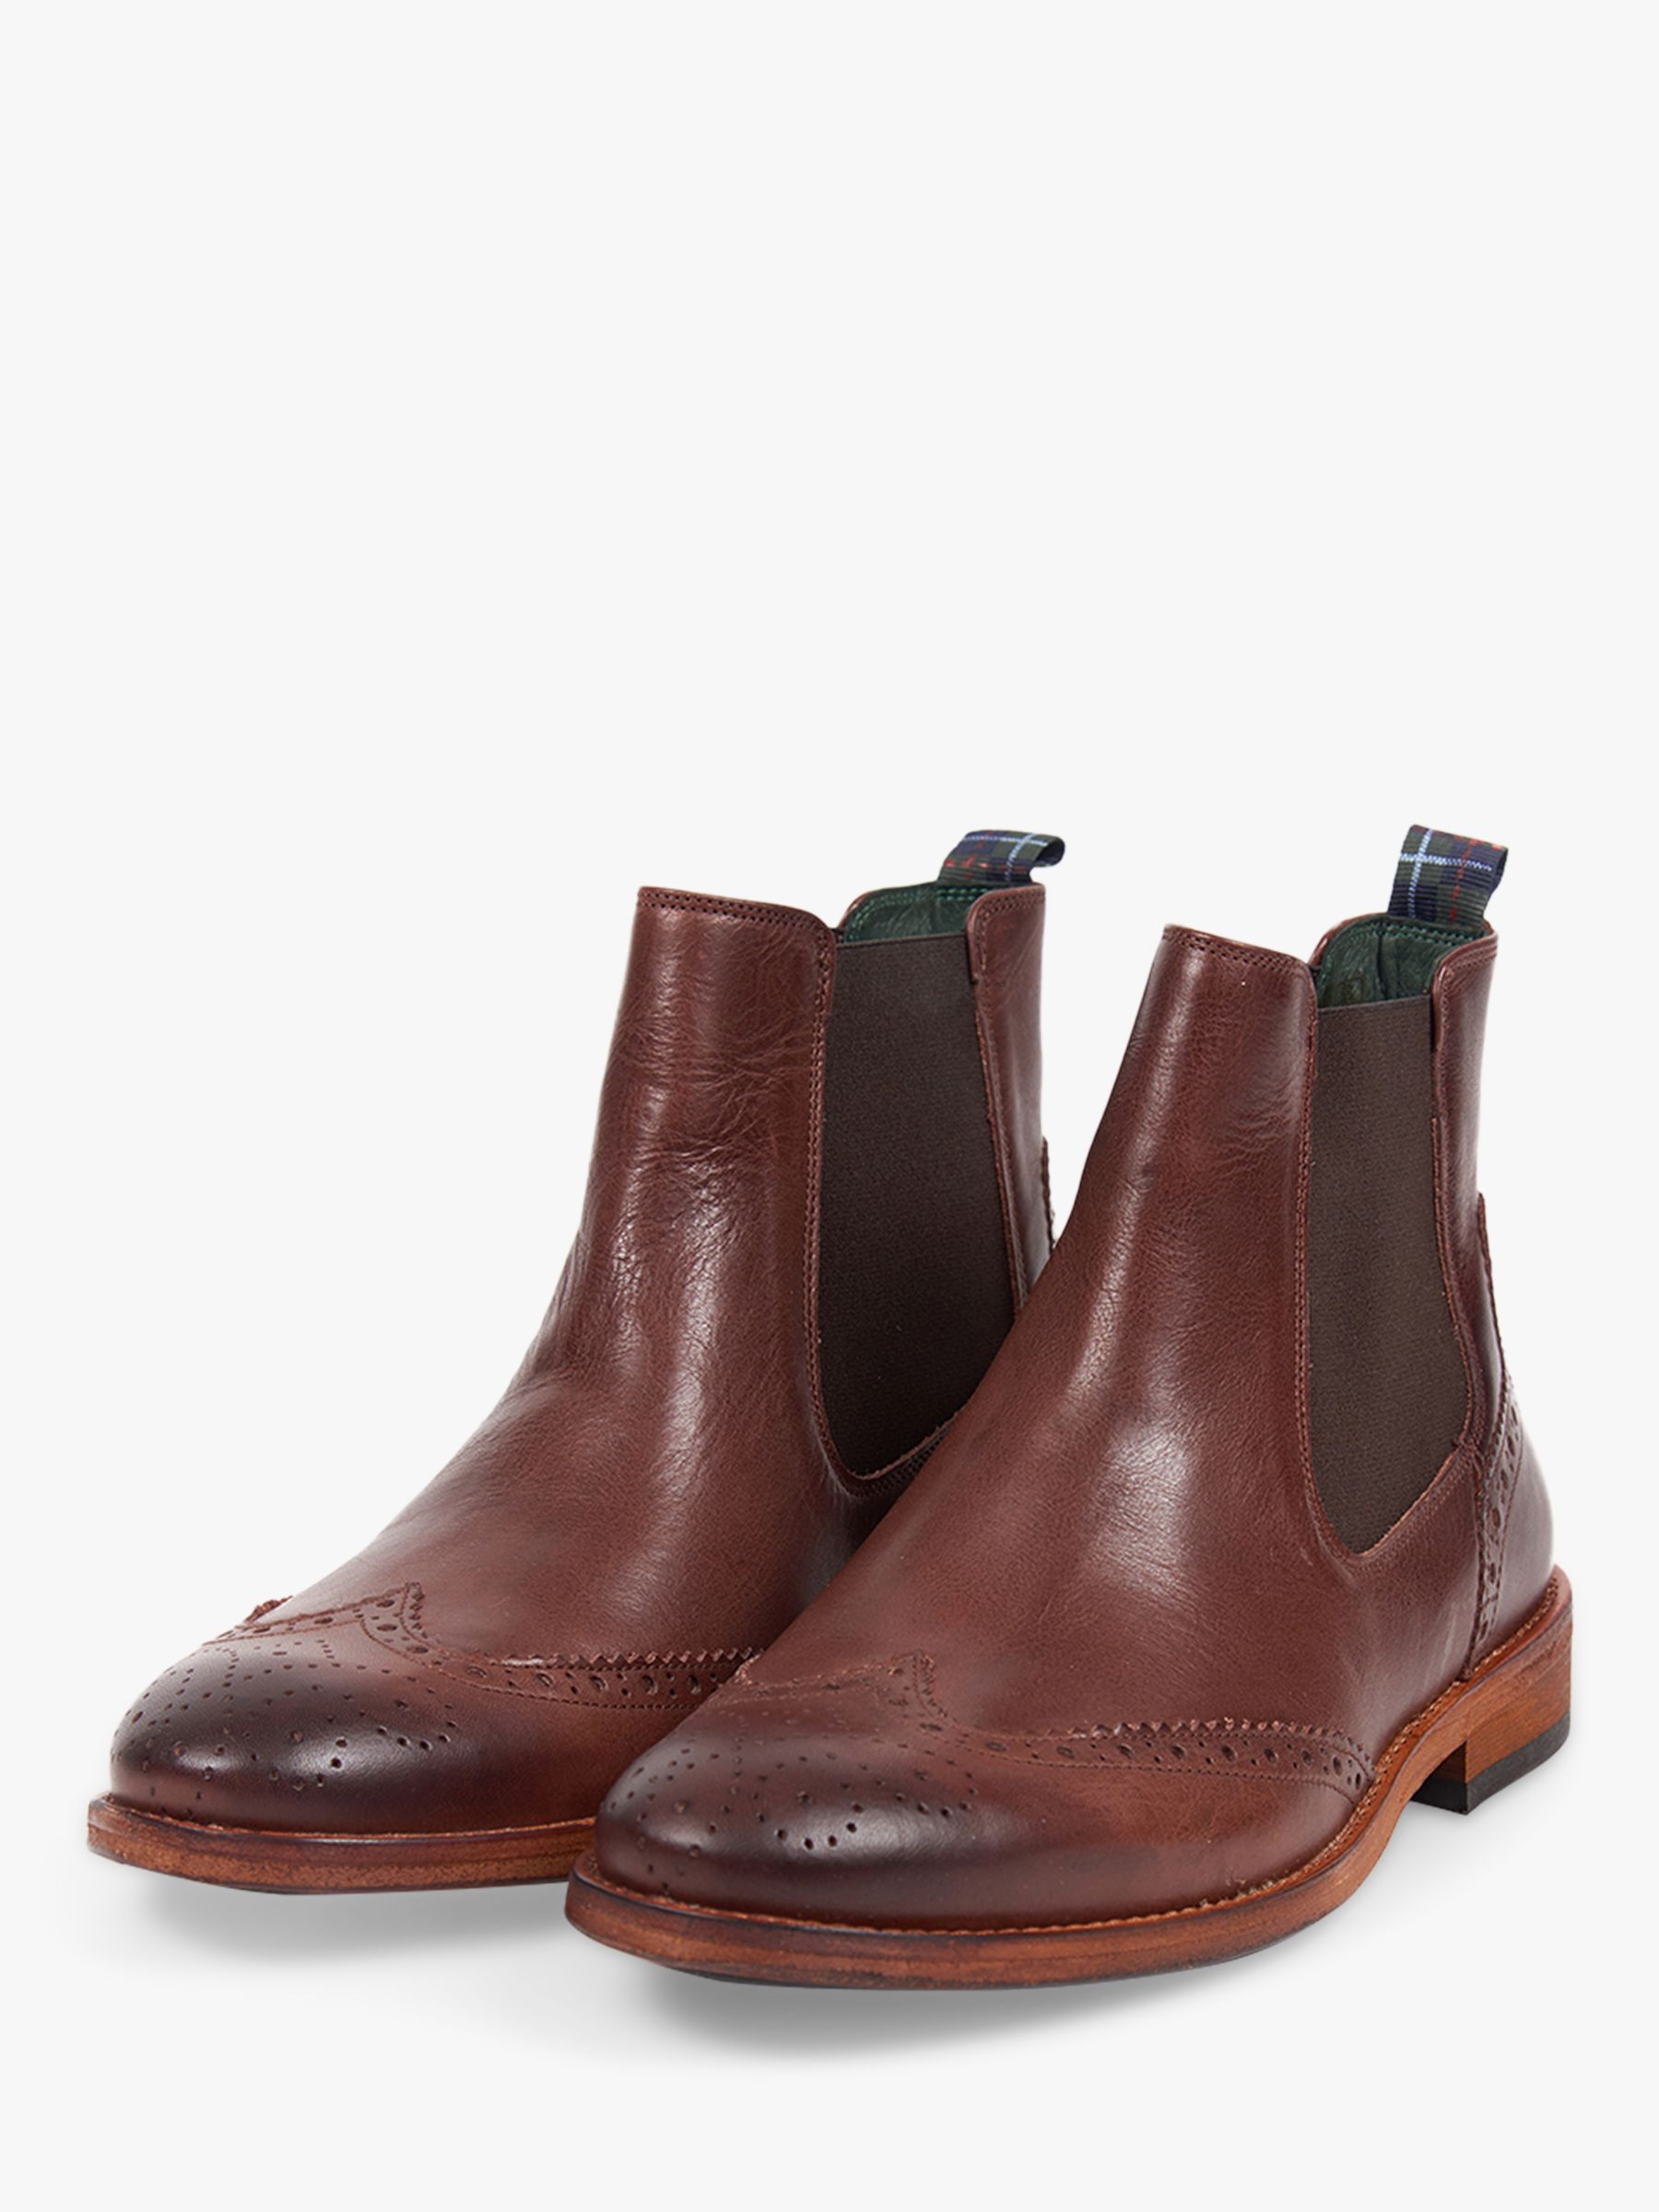 Barbour Raunds Chelsea Boots, Brown 